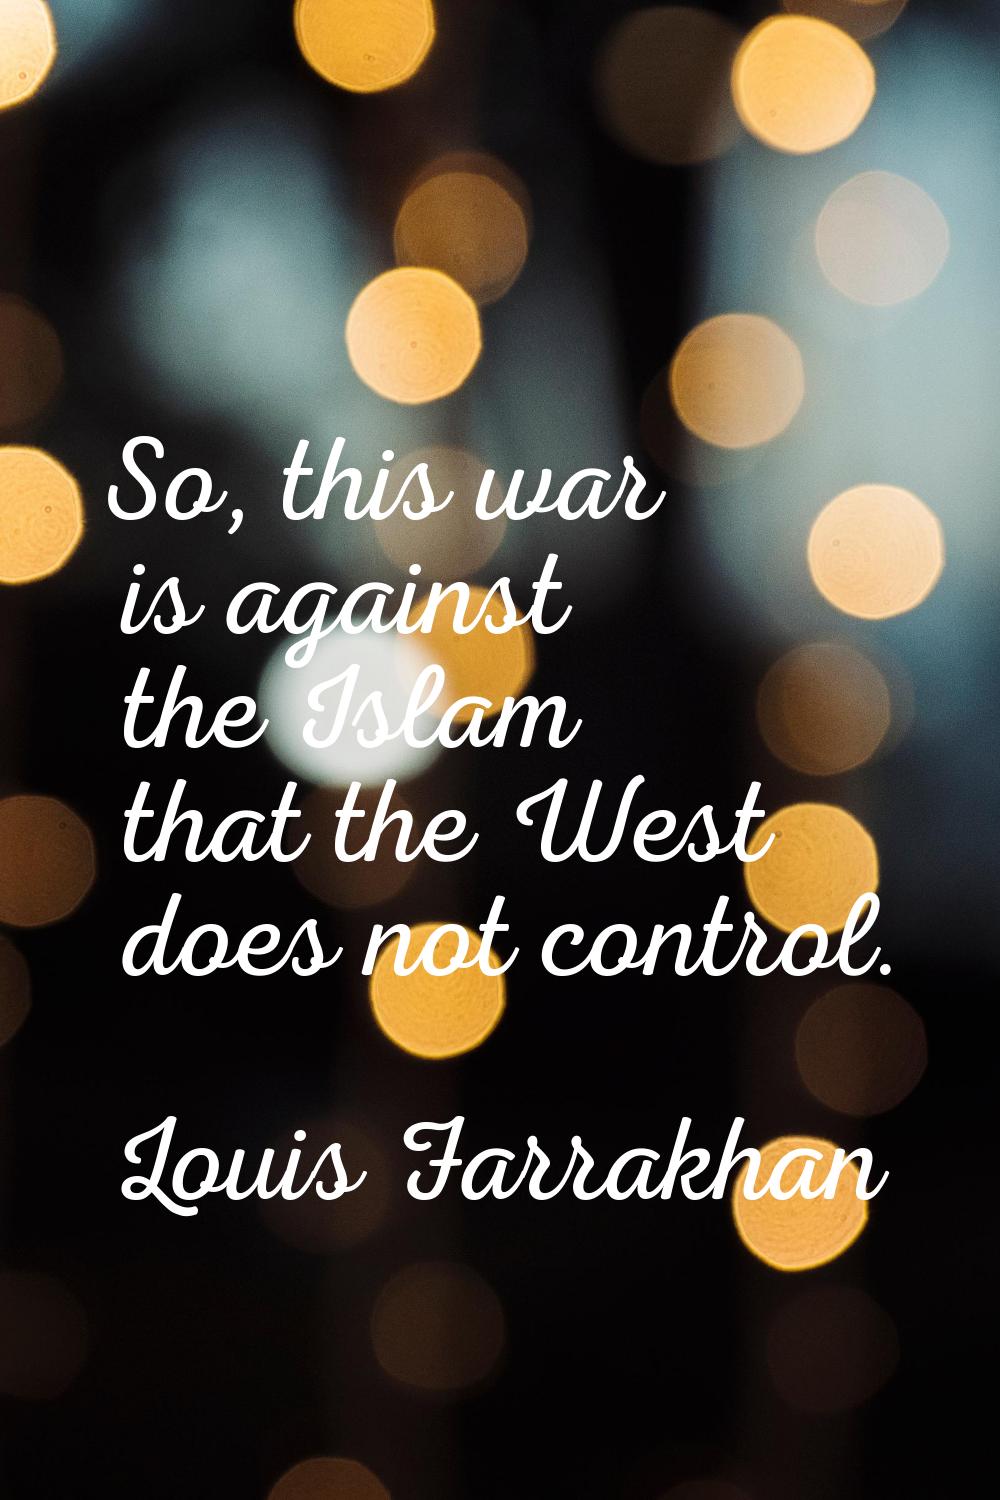 So, this war is against the Islam that the West does not control.